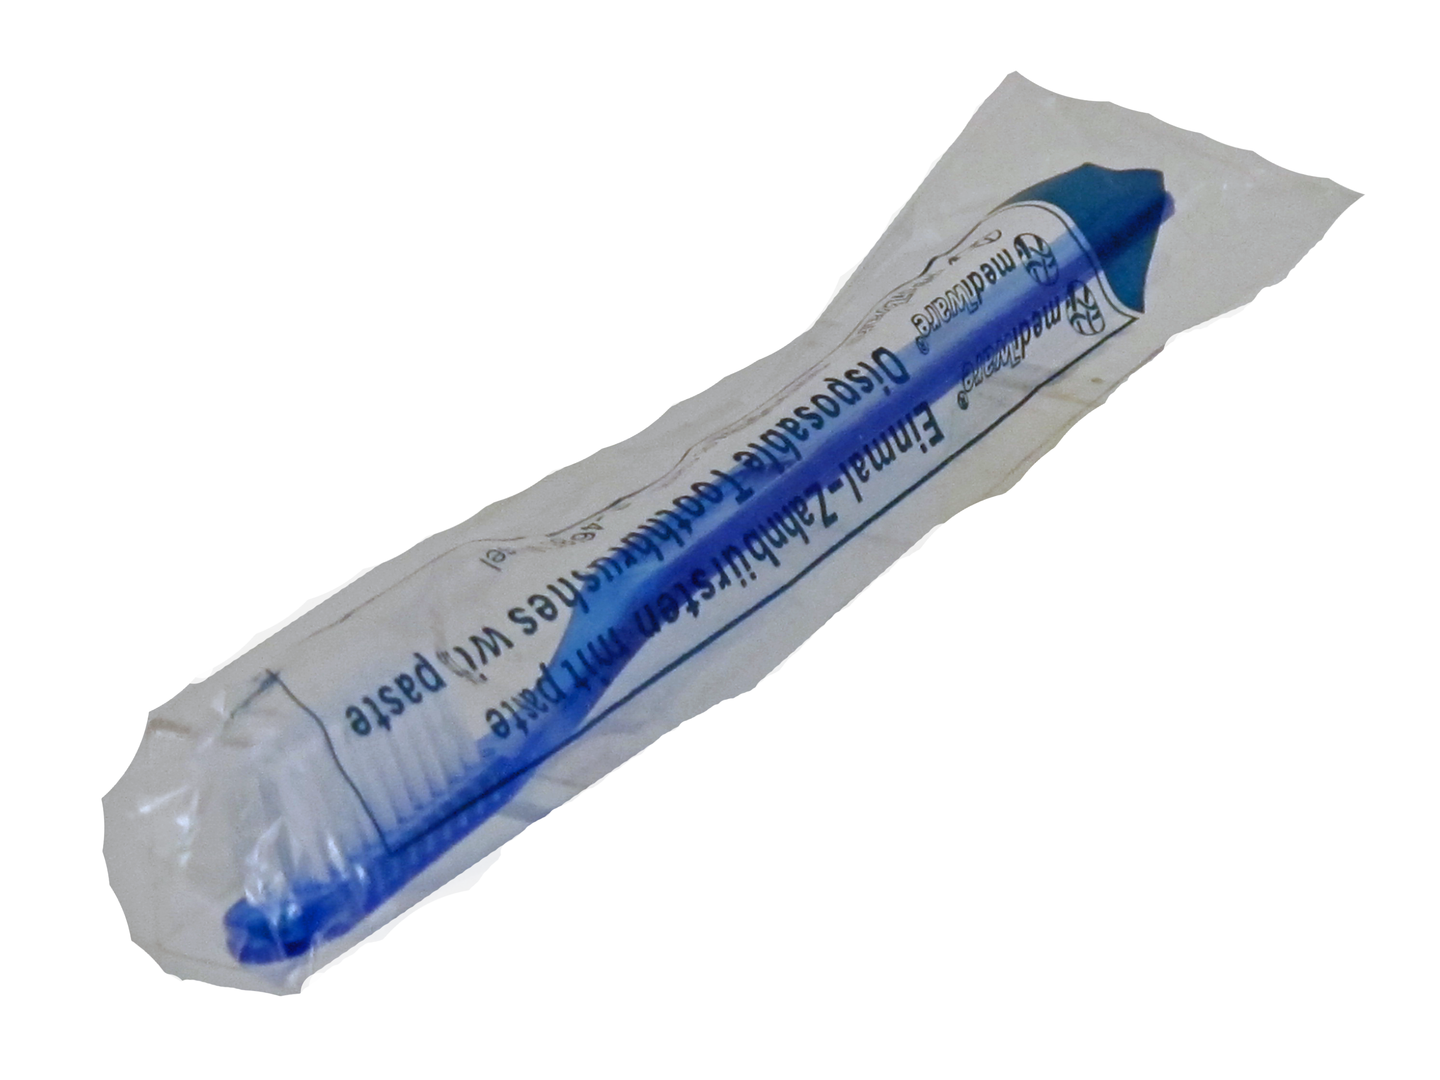 Disposable toothbrush with tooth powder set of 10 - 0